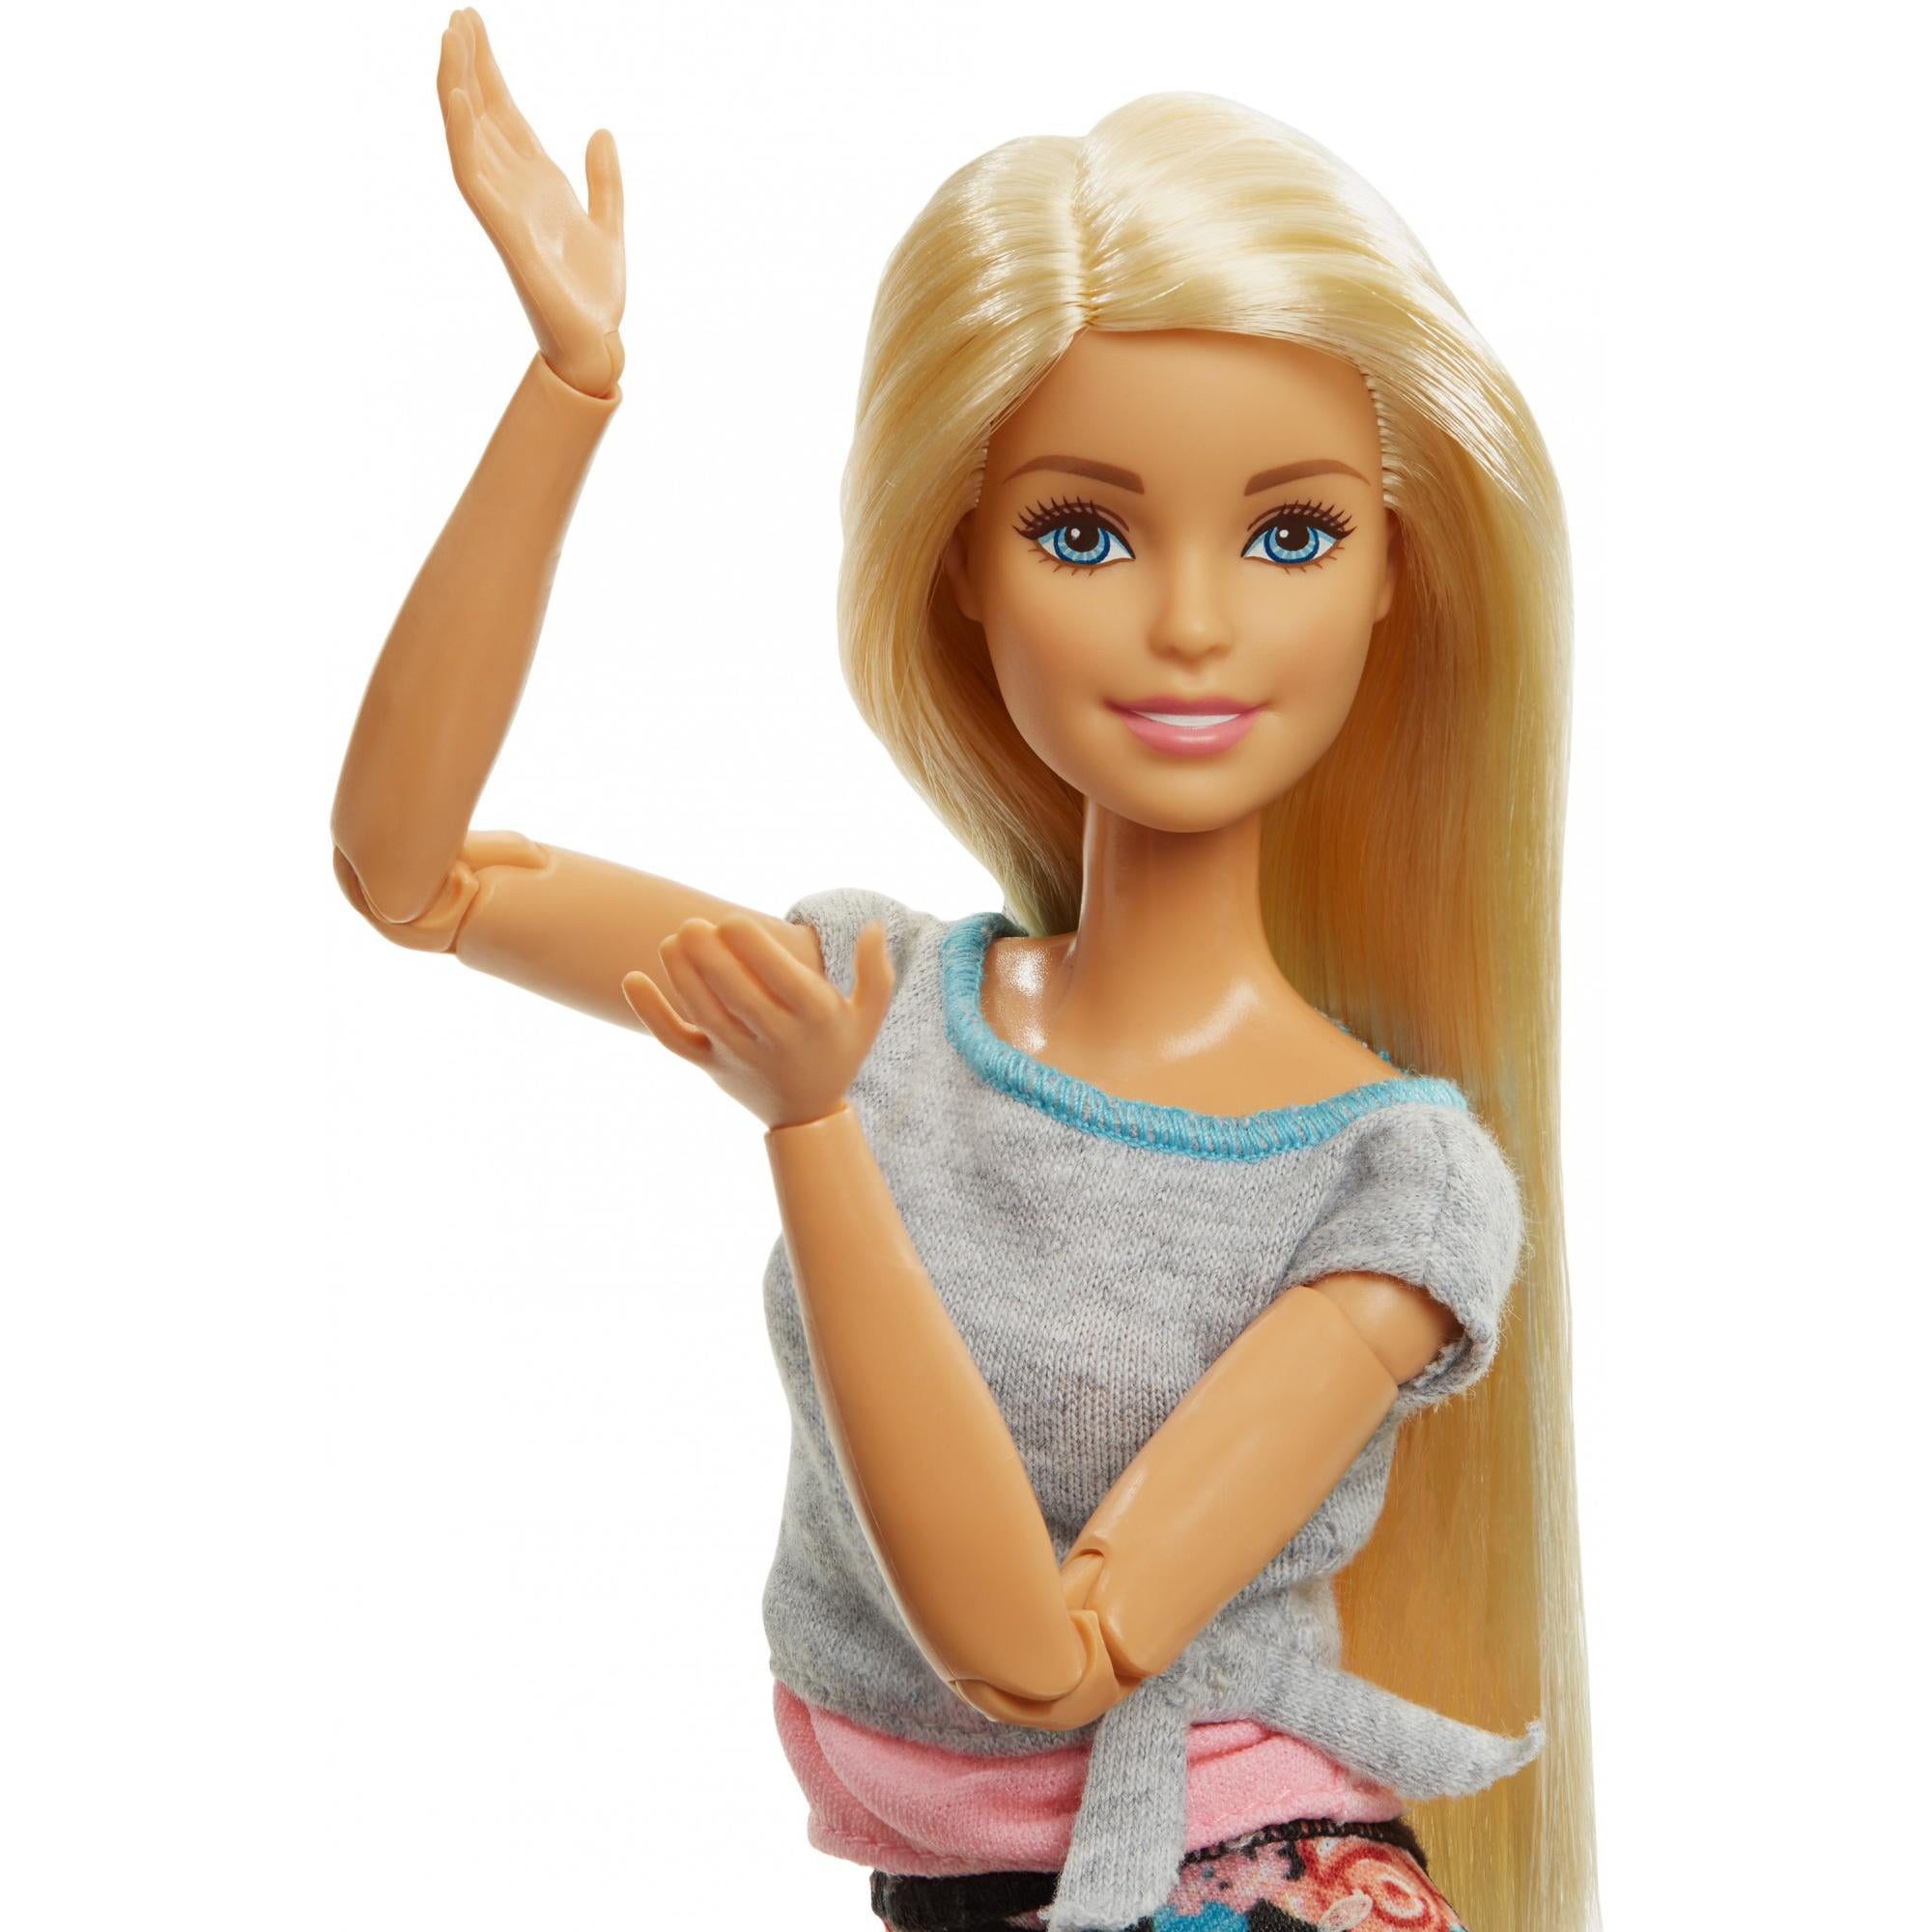 barbie with bendy arms and legs